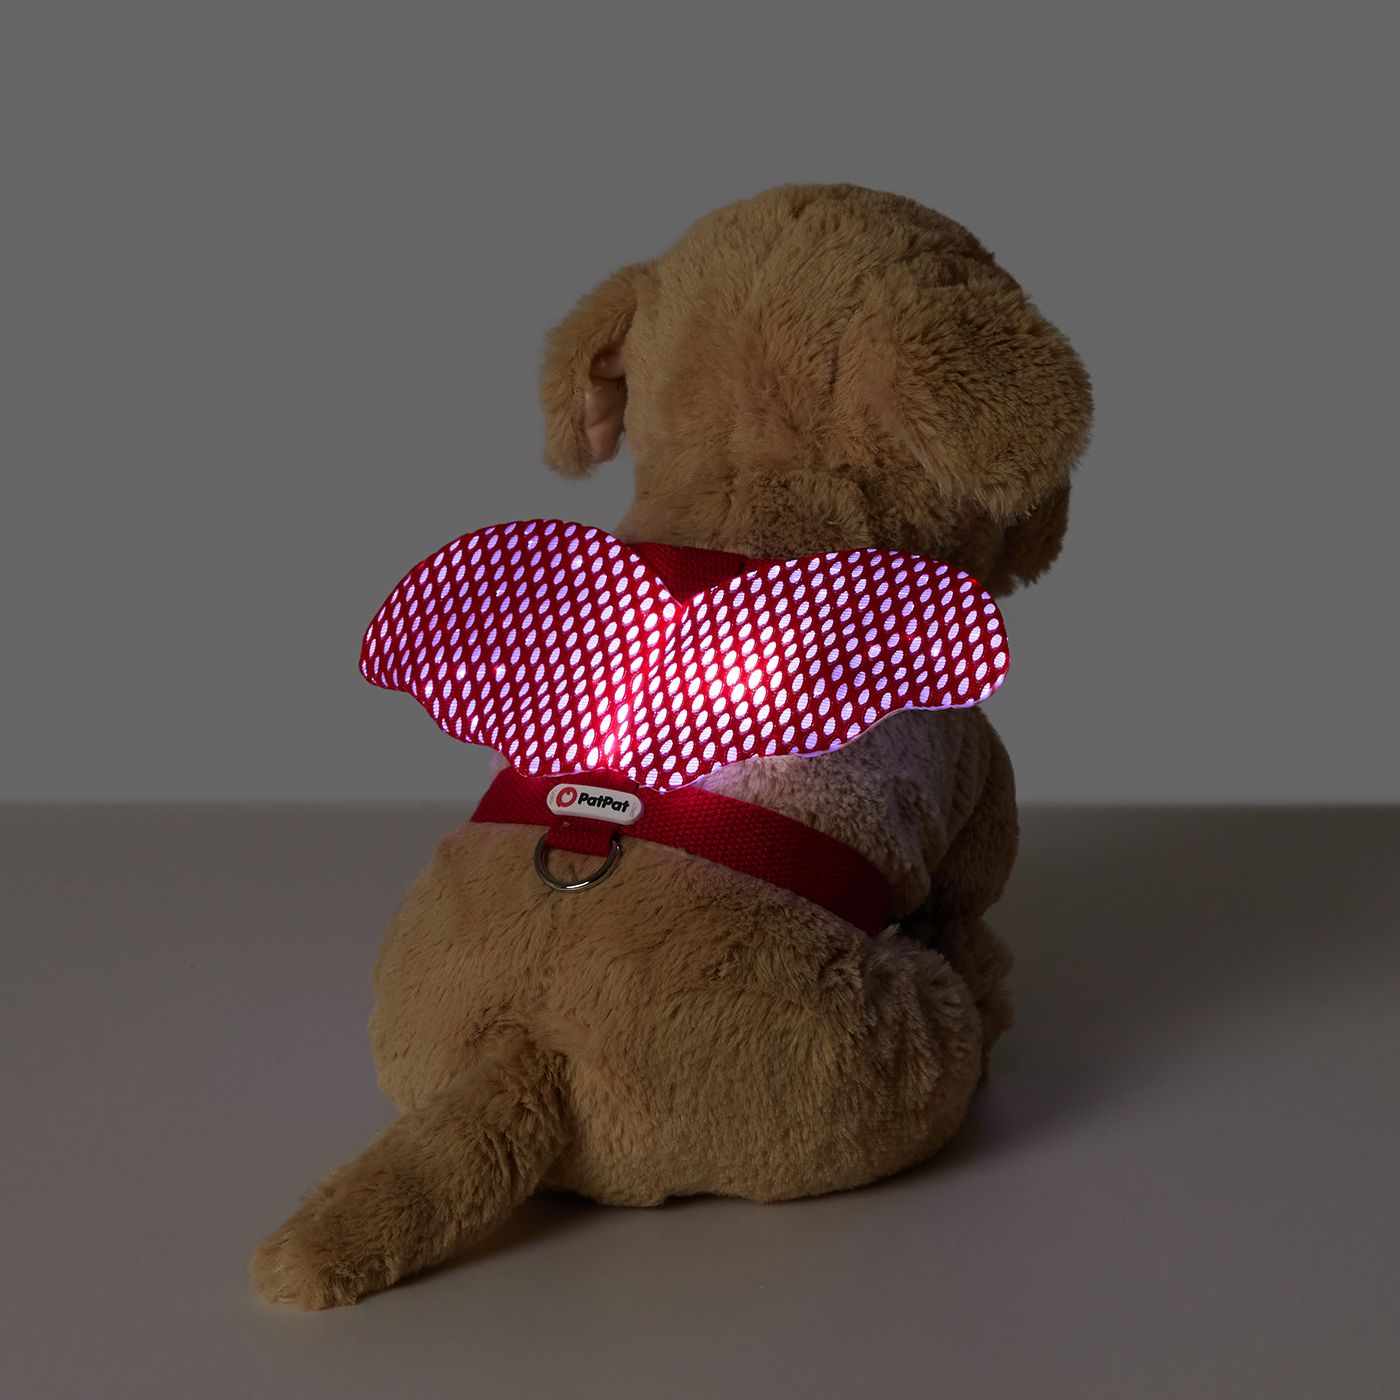 Go-Glow Illuminating Pet Harness Light Up Wings for Small Medium Pets Including Controller (Built-In